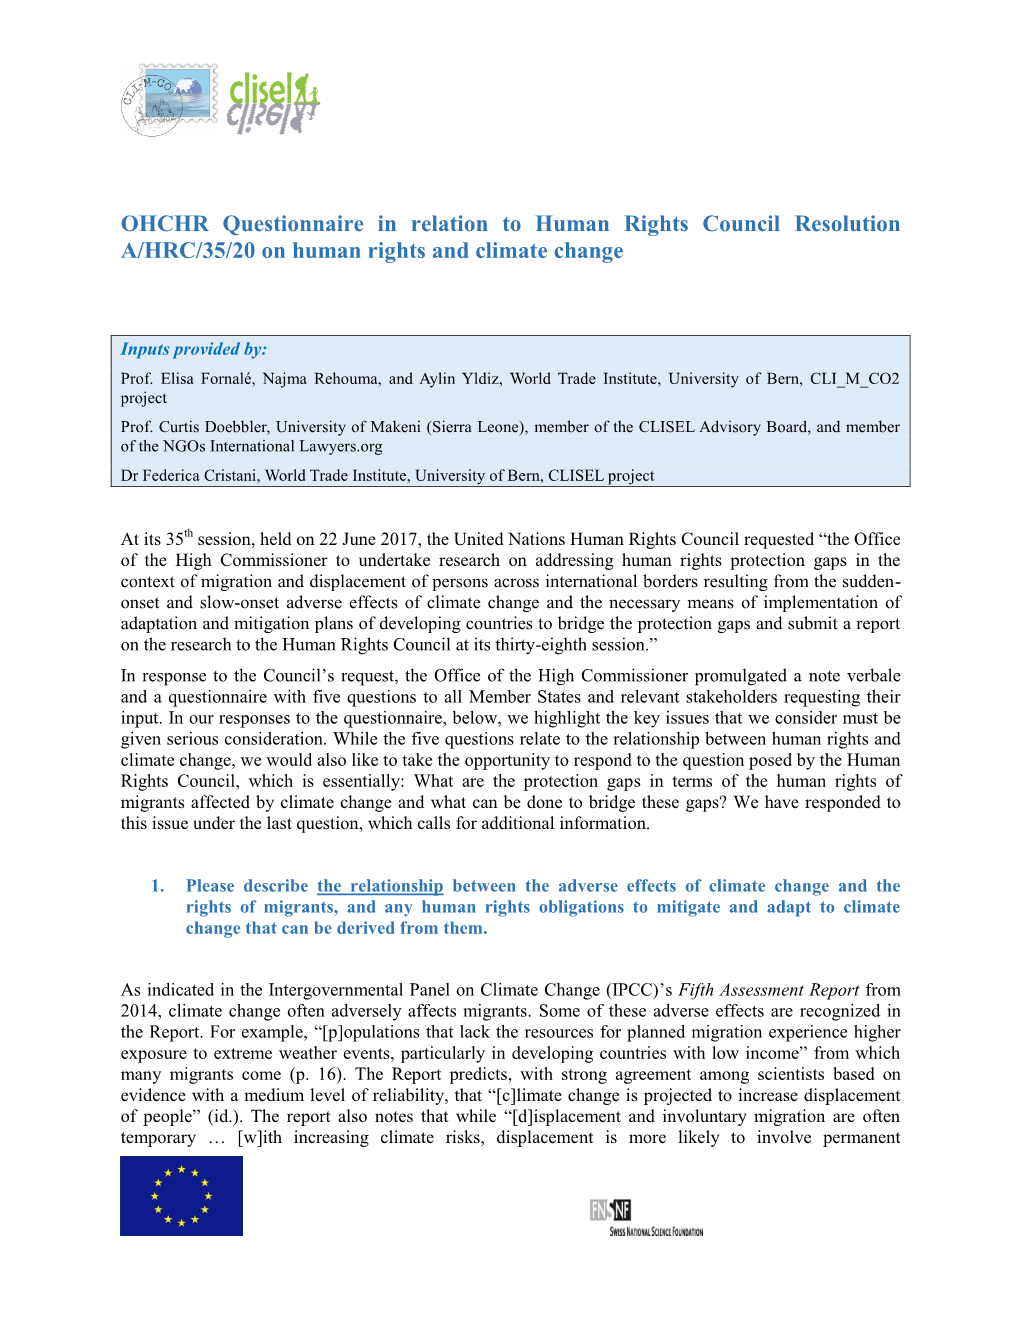 OHCHR Questionnaire in Relation to Human Rights Council Resolution A/HRC/35/20 on Human Rights and Climate Change